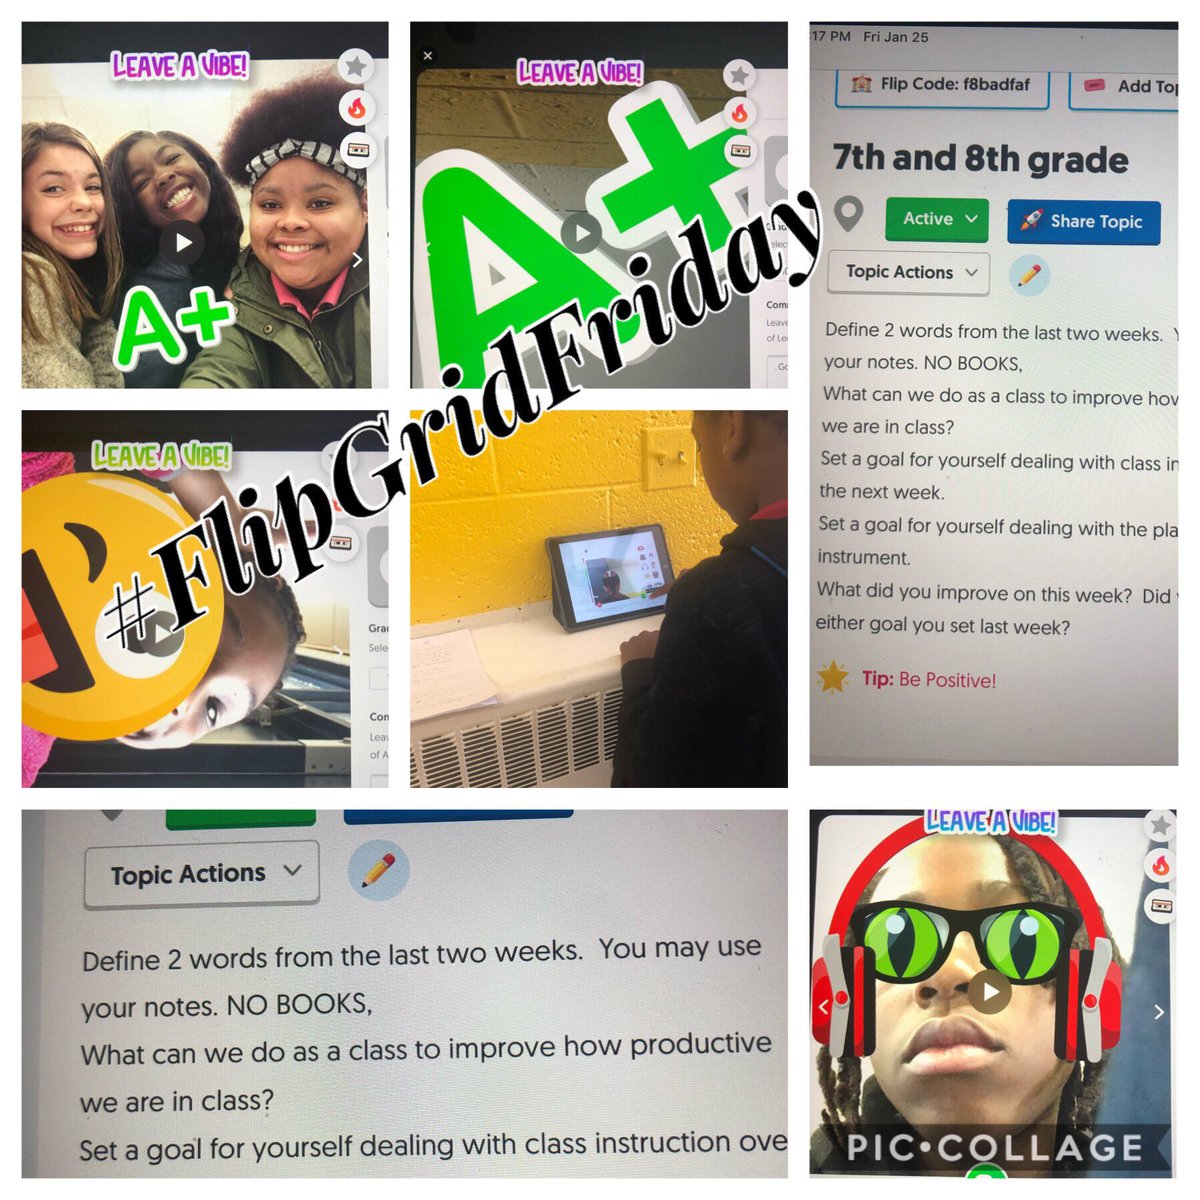 Today was #FlipgridFriday.  Ss shared vocabulary they have learned and set goals for next week.  Plus they had a little fun. @Flipgrid @WillistonTigers @tsmarkley @jeannietimken @NhcsArts @kclark166 @Jill713 @LaChawnSmith @NCMEA